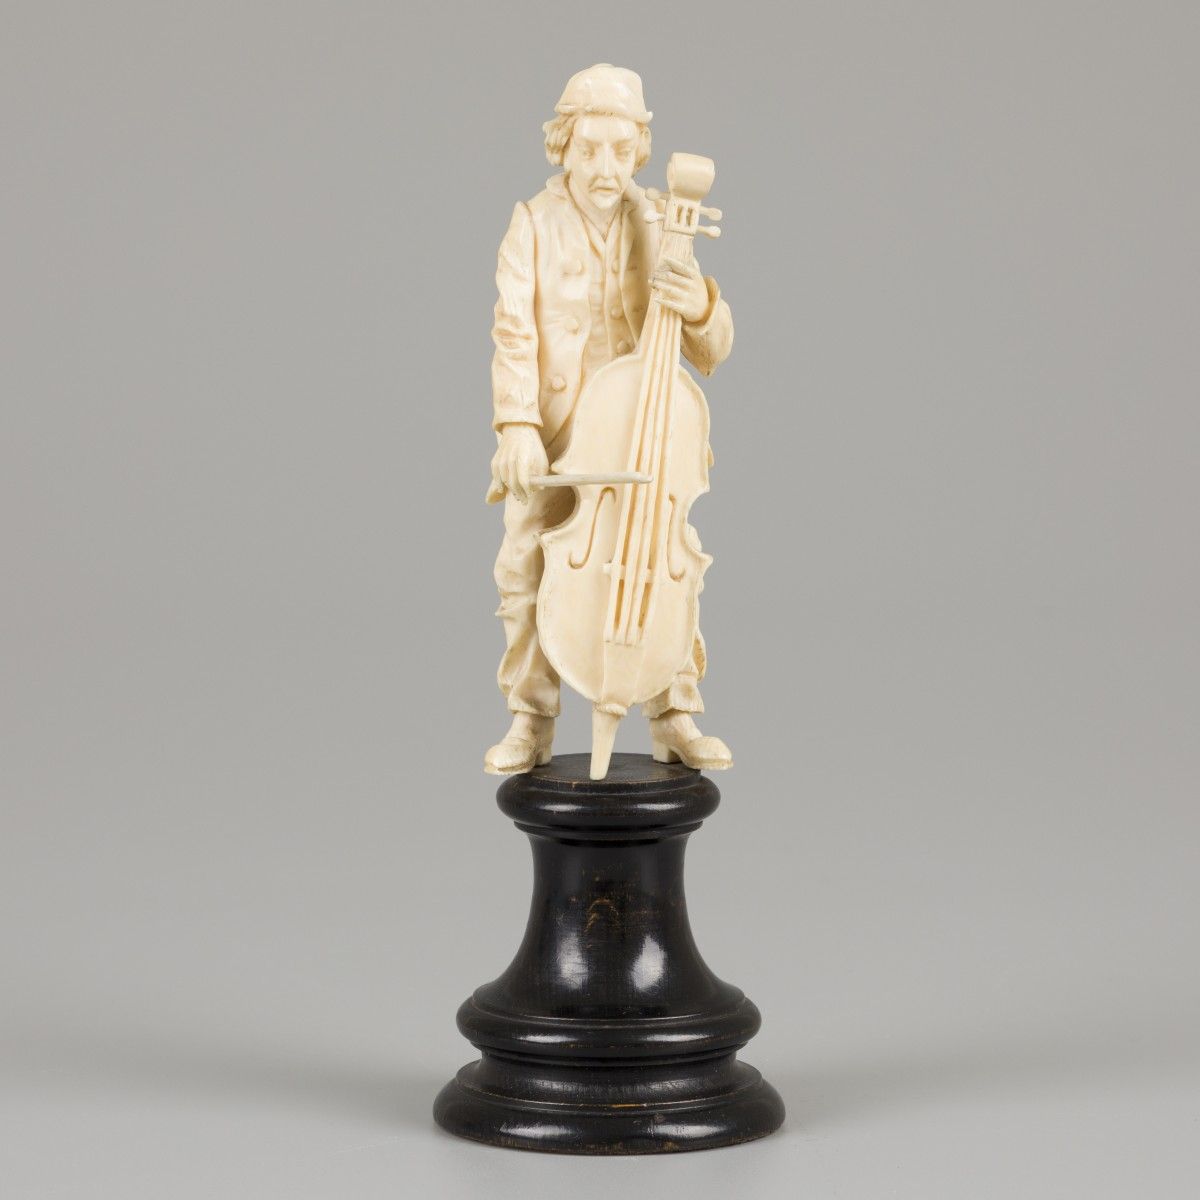 An ivory sculpture of a man with bass, 19th century. Dim. 20 x 5 cm. Stima: € 10&hellip;